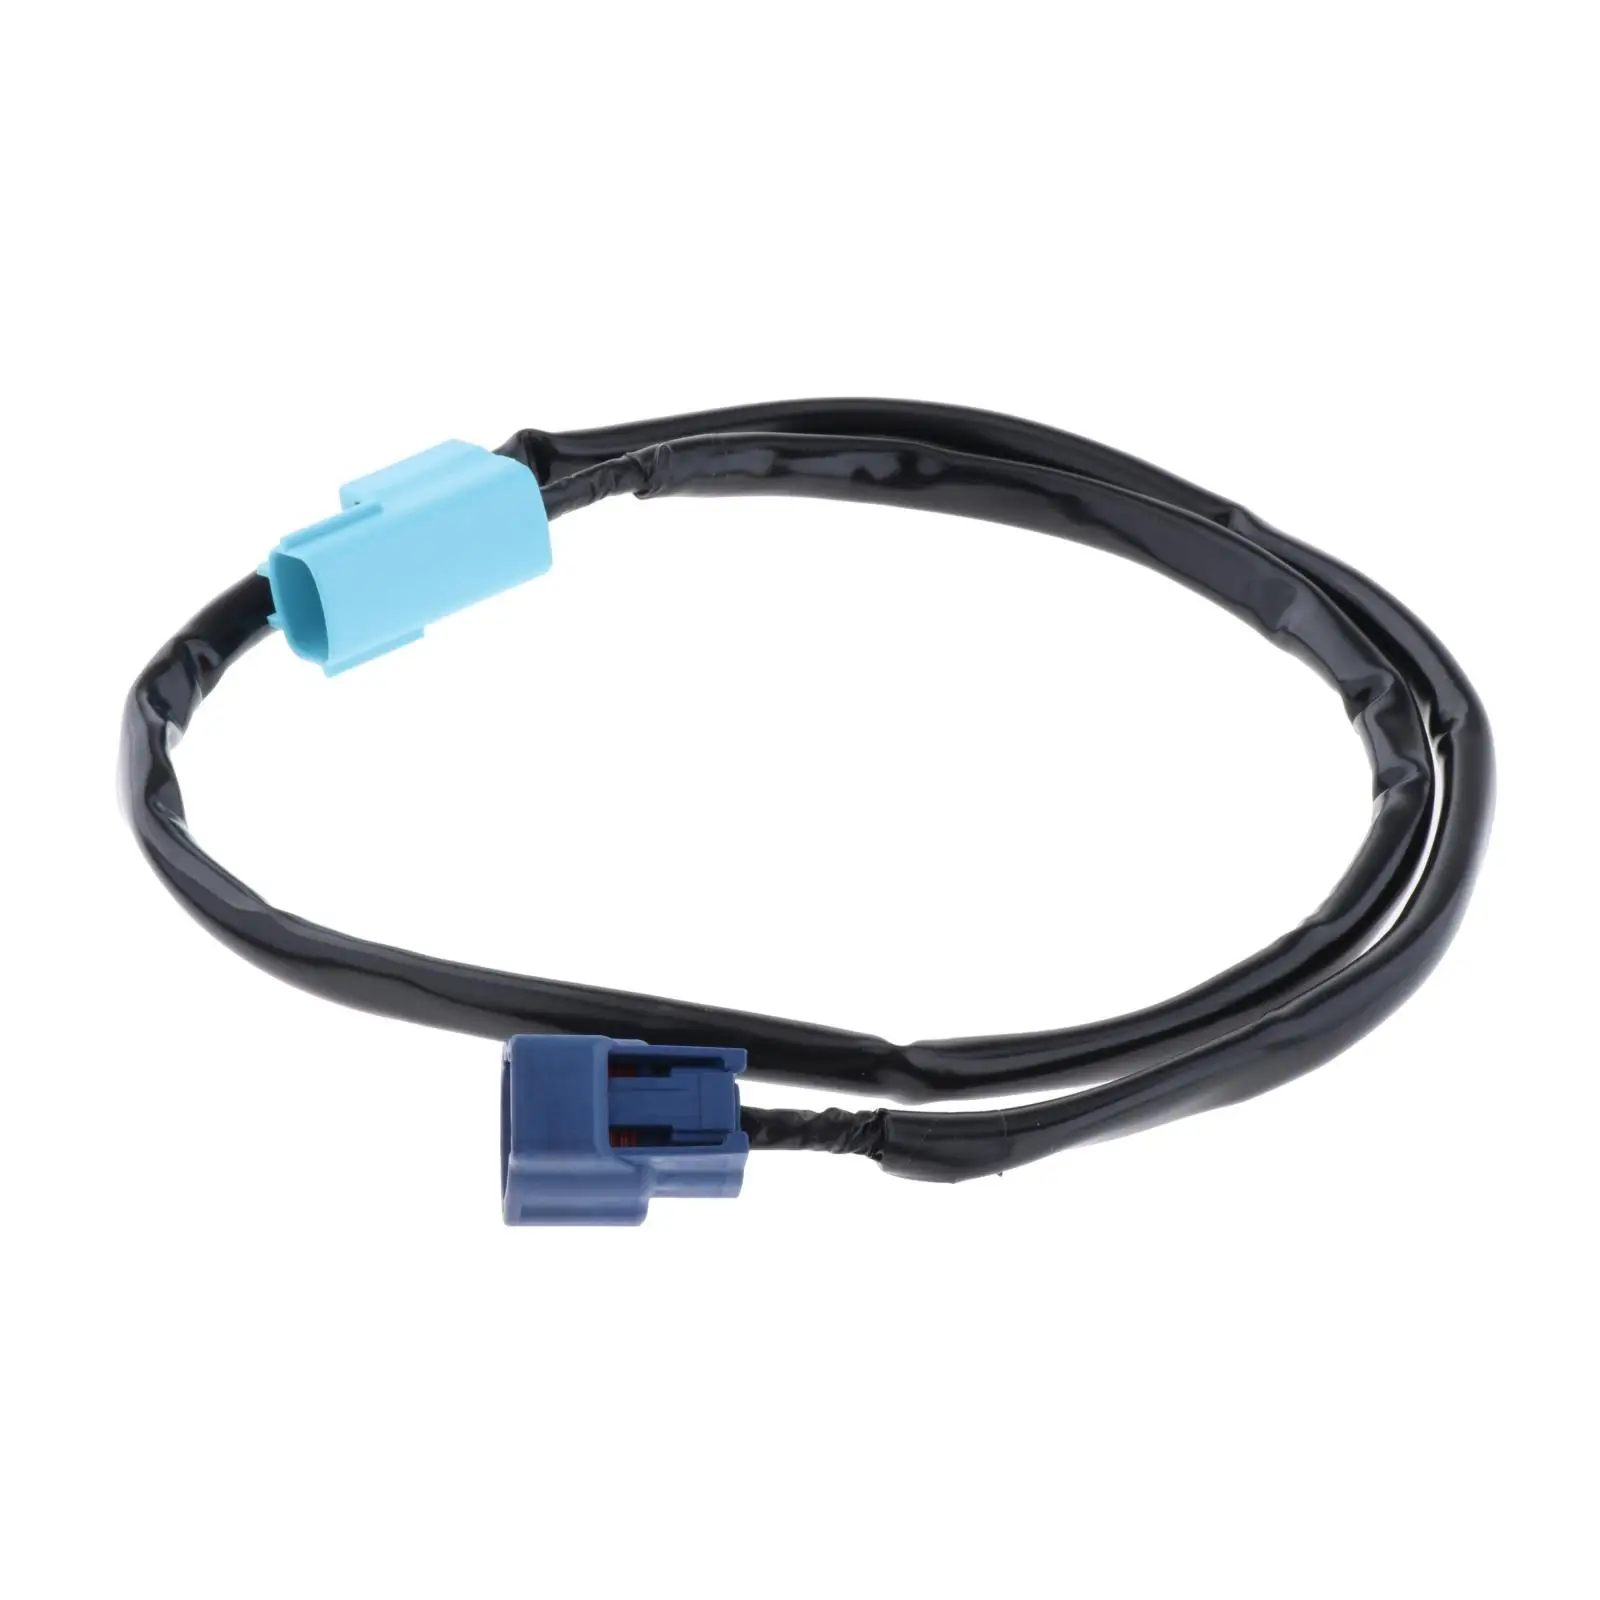 Knock Sensor Wire Sub Harness 139981 Automotive Wiring for  